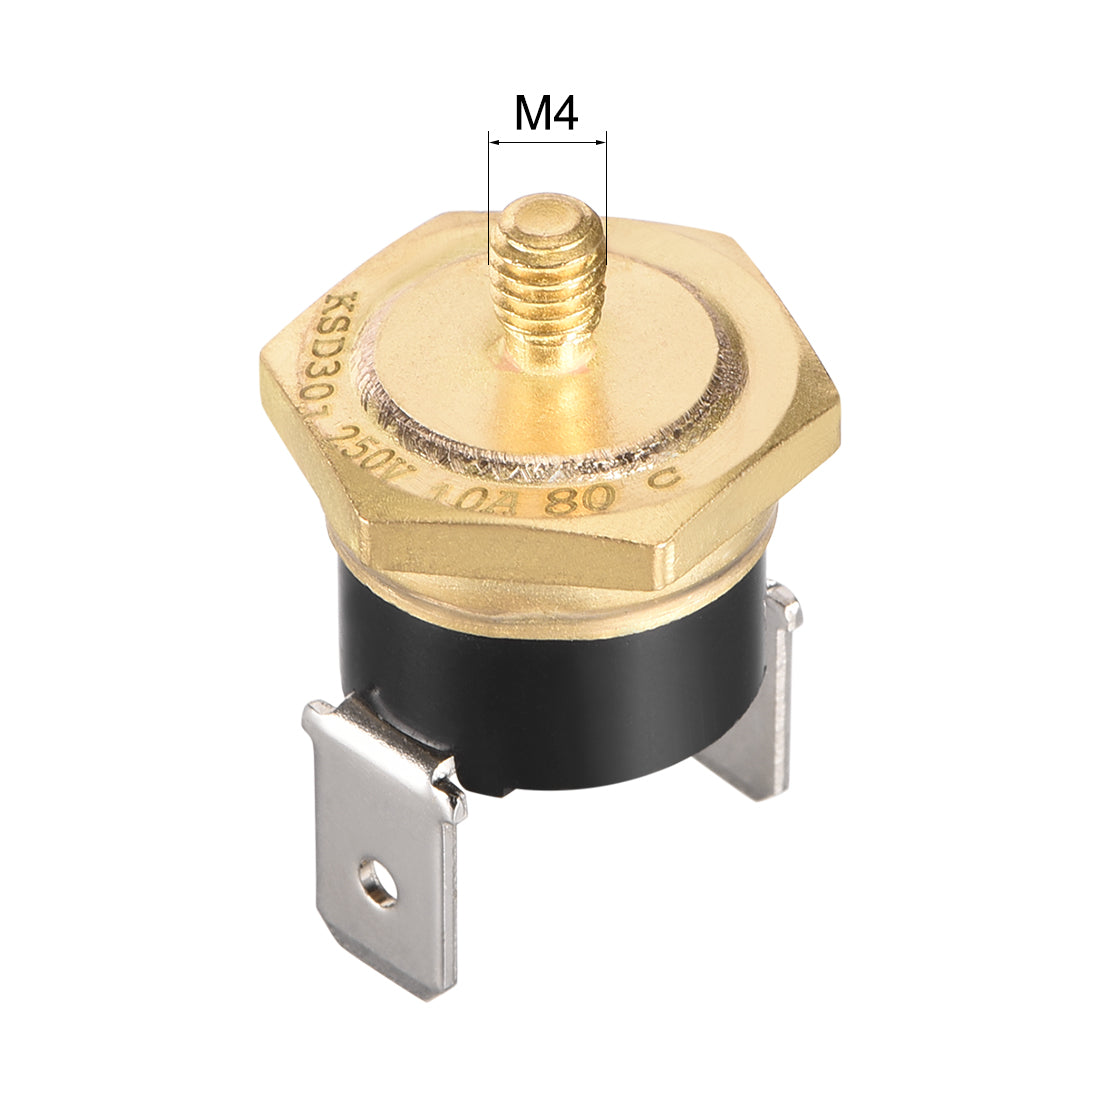 uxcell Uxcell KSD301 Thermostat, Temperature Control Switch 80°C Copper M4 Normally Closed N.C 10A Screw Mount